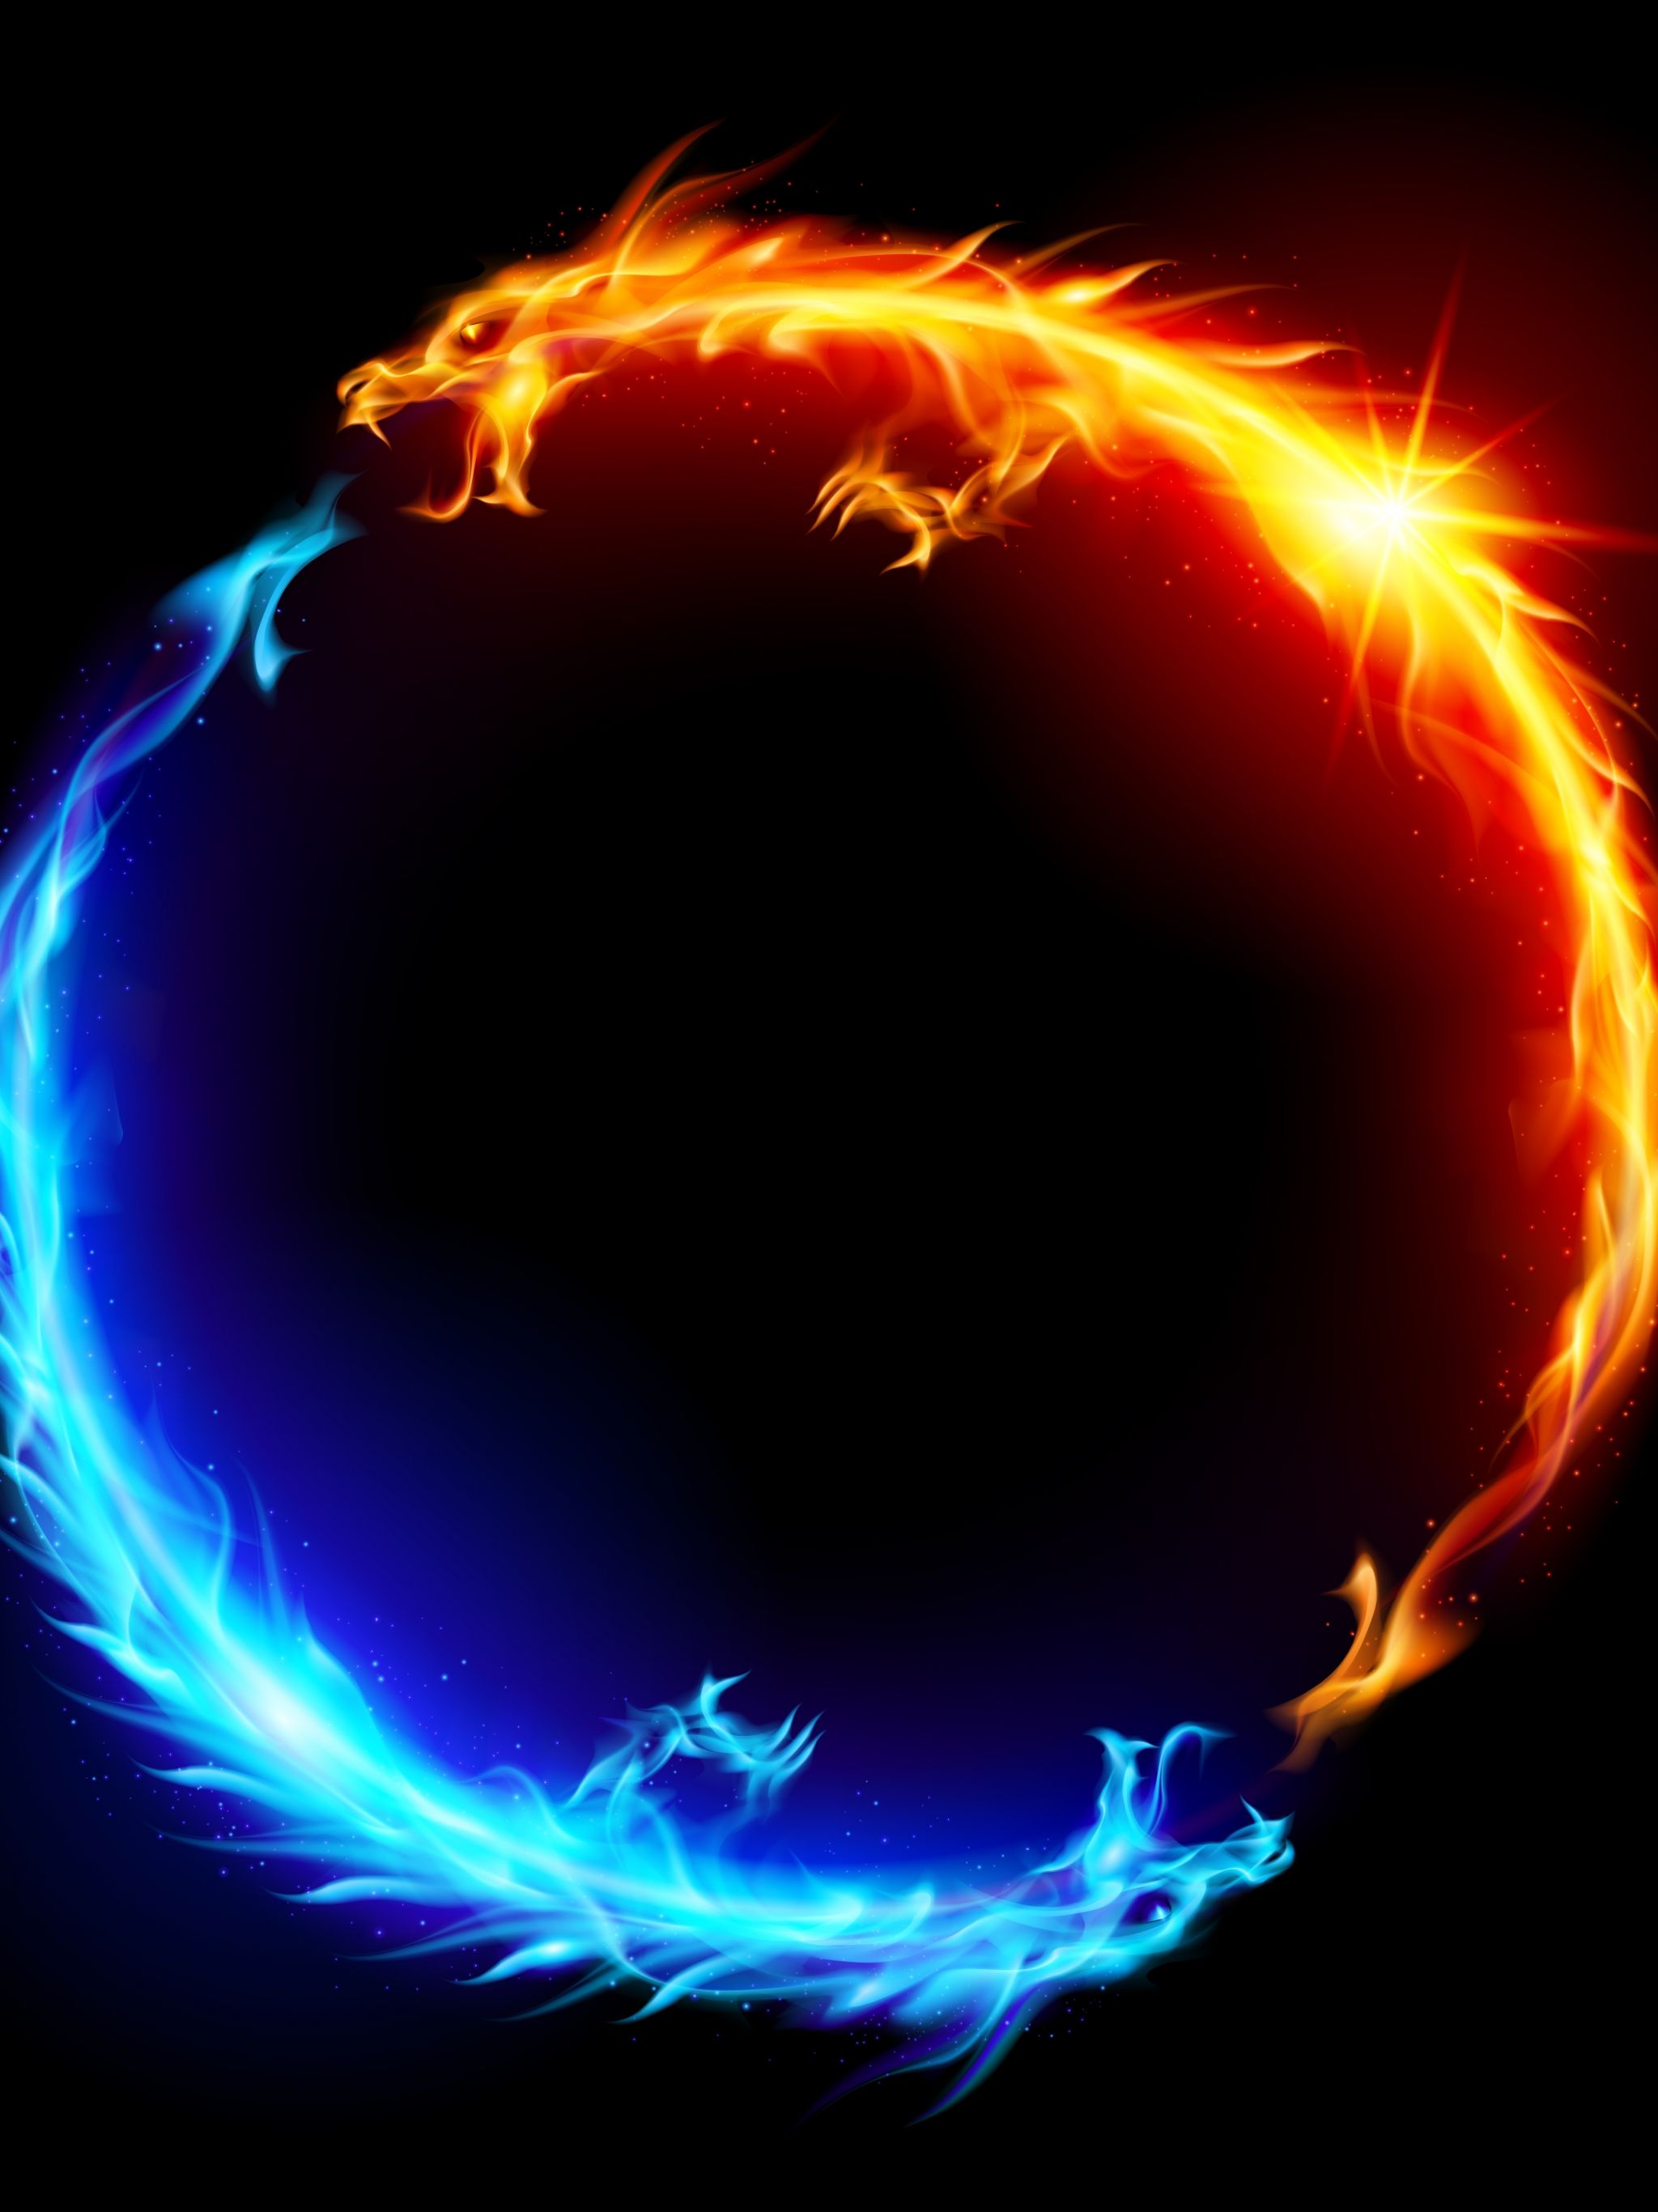 Free download Blue and red fire Dragons Stephen Josephs 5000x5000